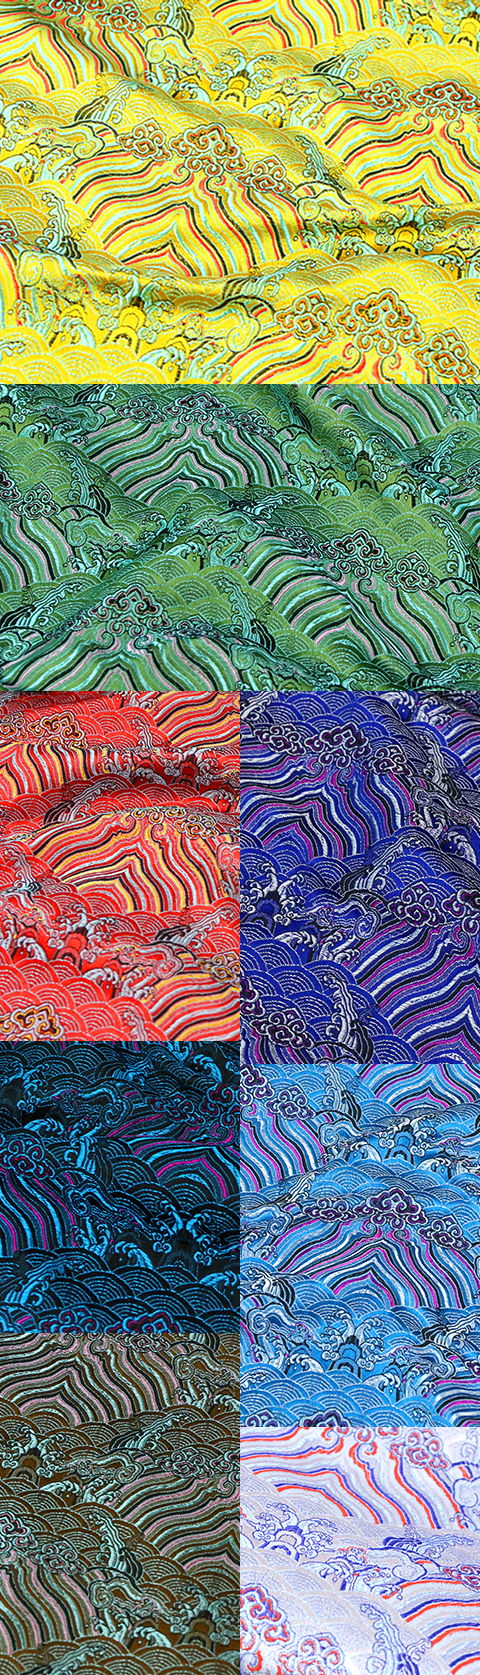 Fabric - Waves and Clouds Brocade (Multicolor)